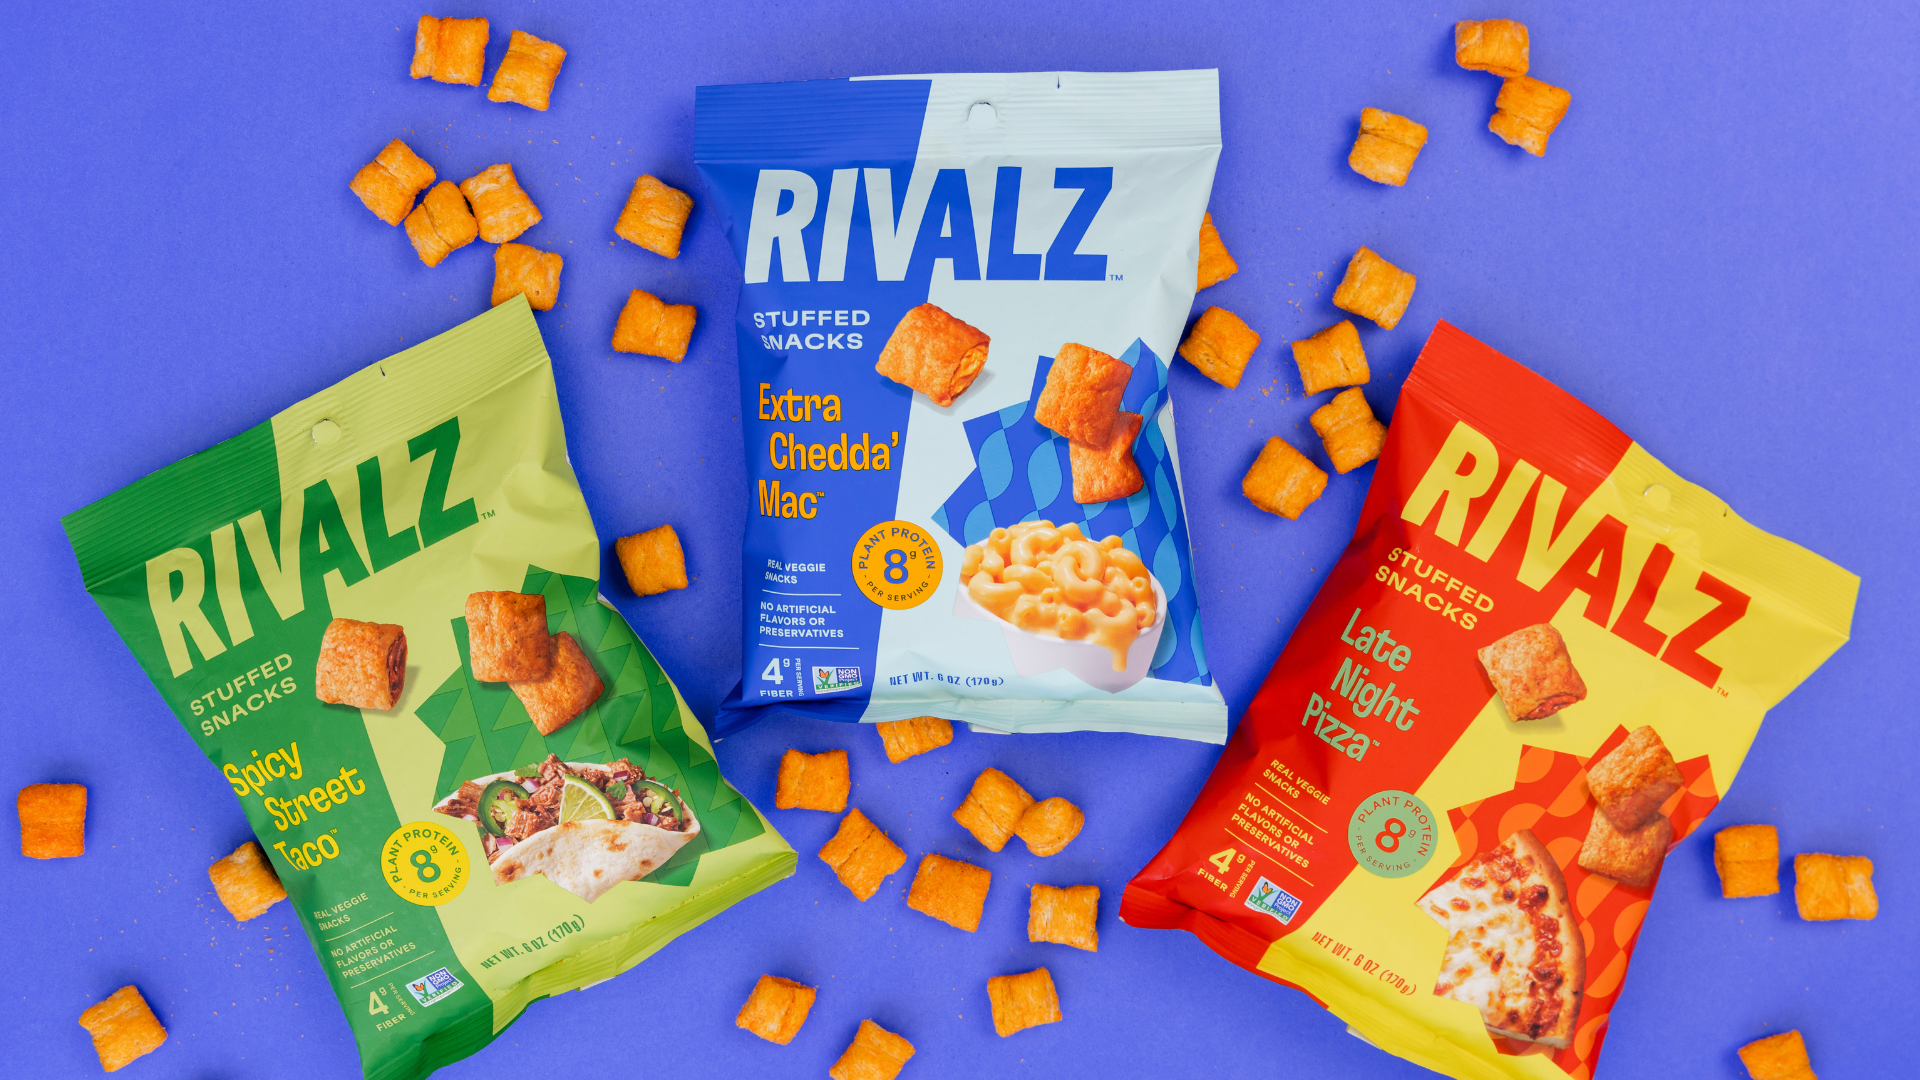 5 Reasons to Explore Rivalz Snacks: The Future of Snacking